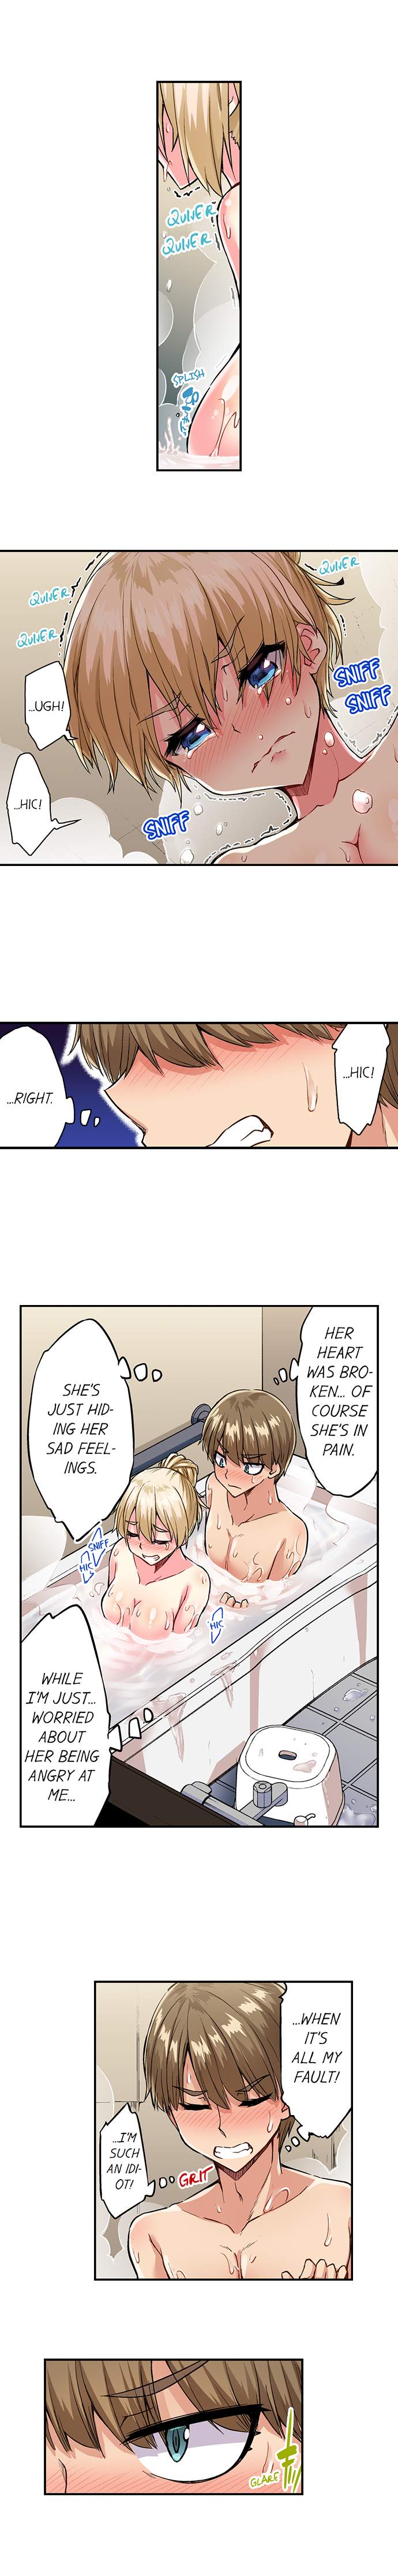 Traditional Job of Washing Girls’ Body - Chapter 160 Page 8